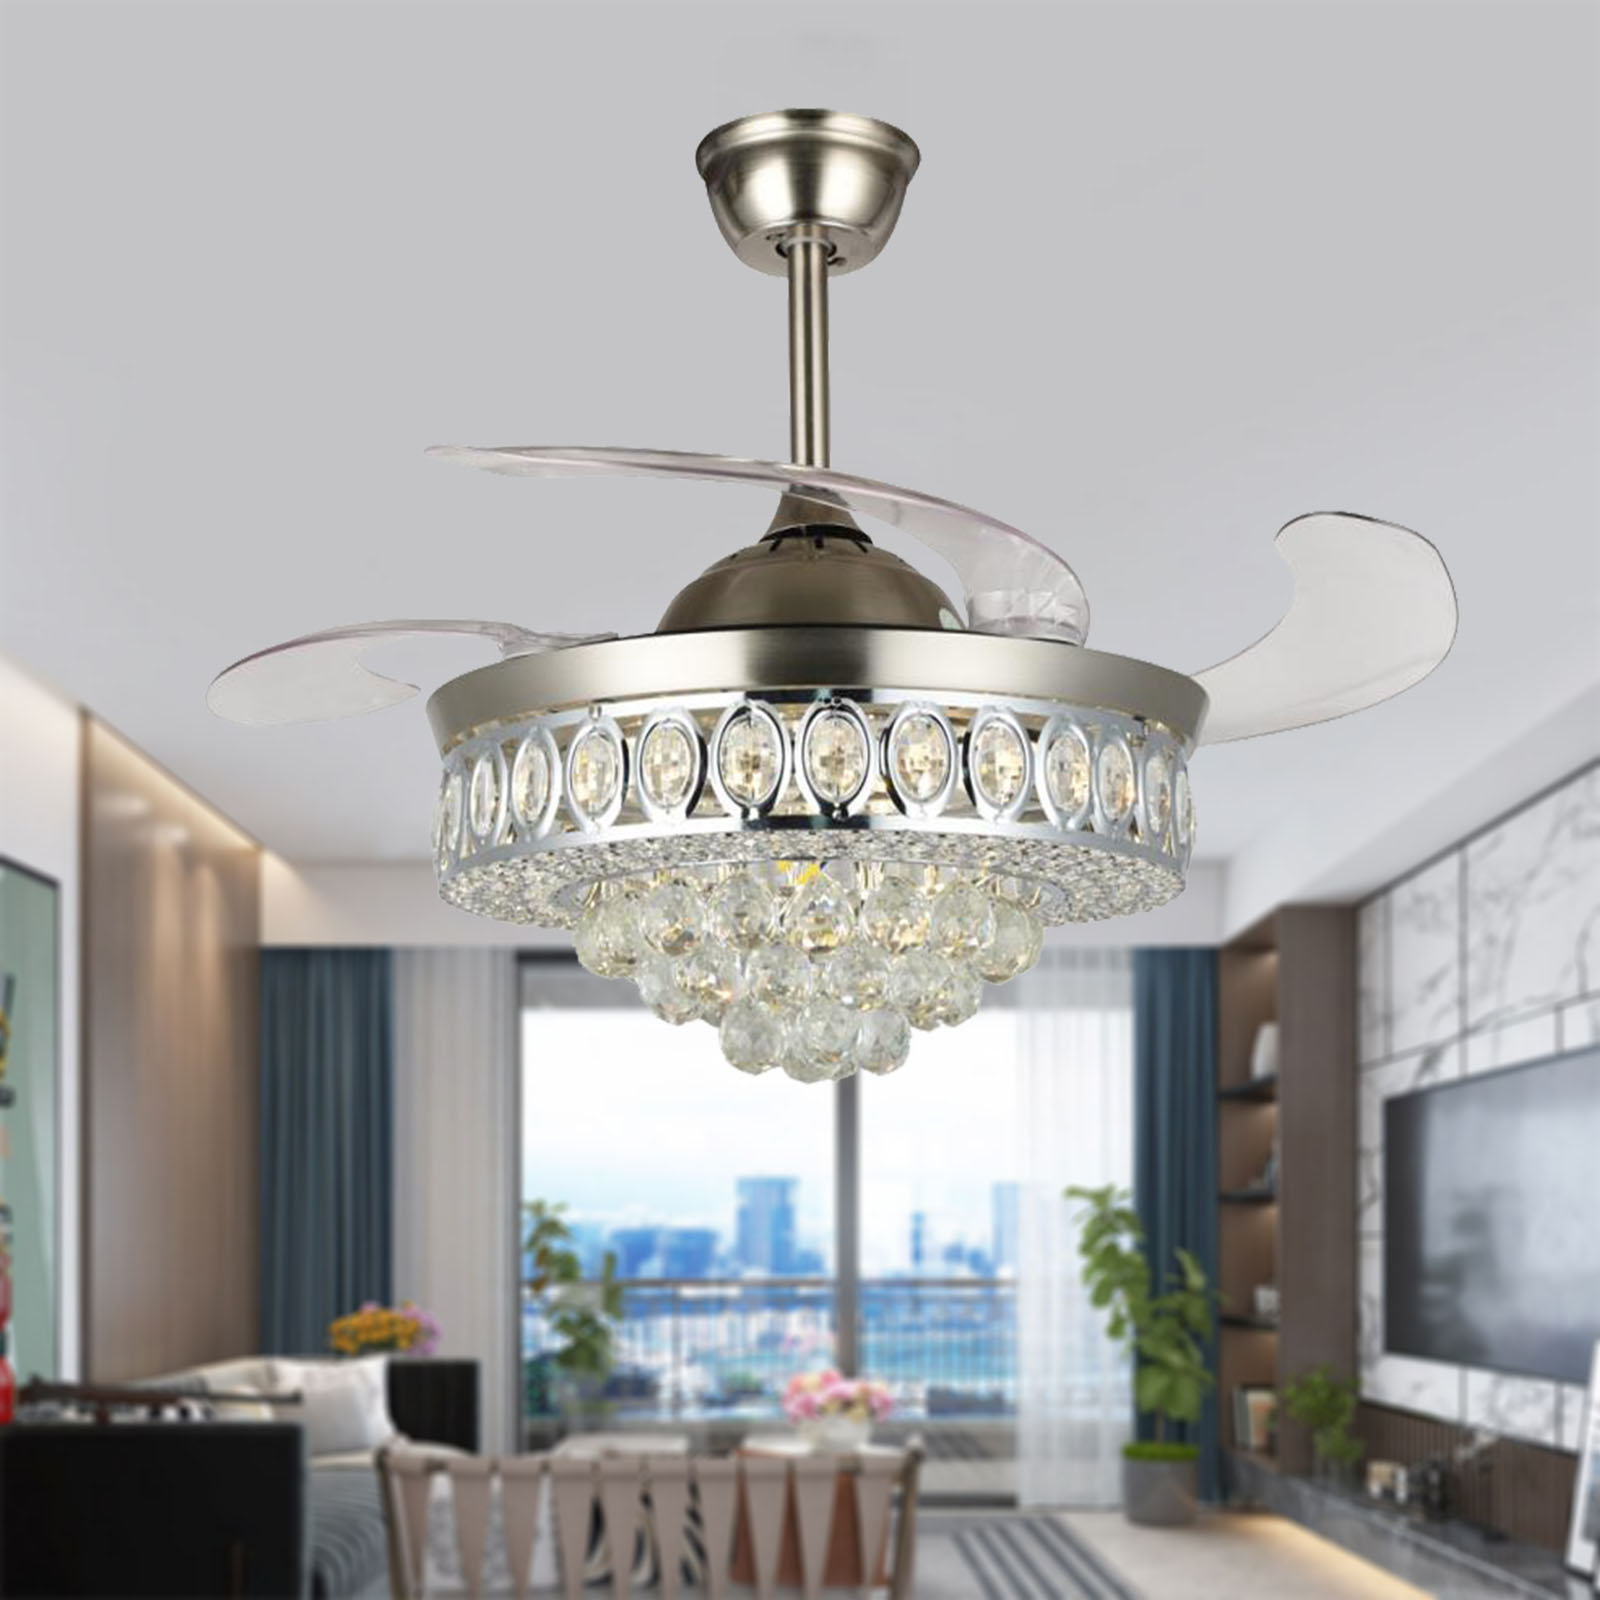 42" Crystal LED Chandelier Remote Invisible Blade Ceiling Fan Light w/ Remote US 